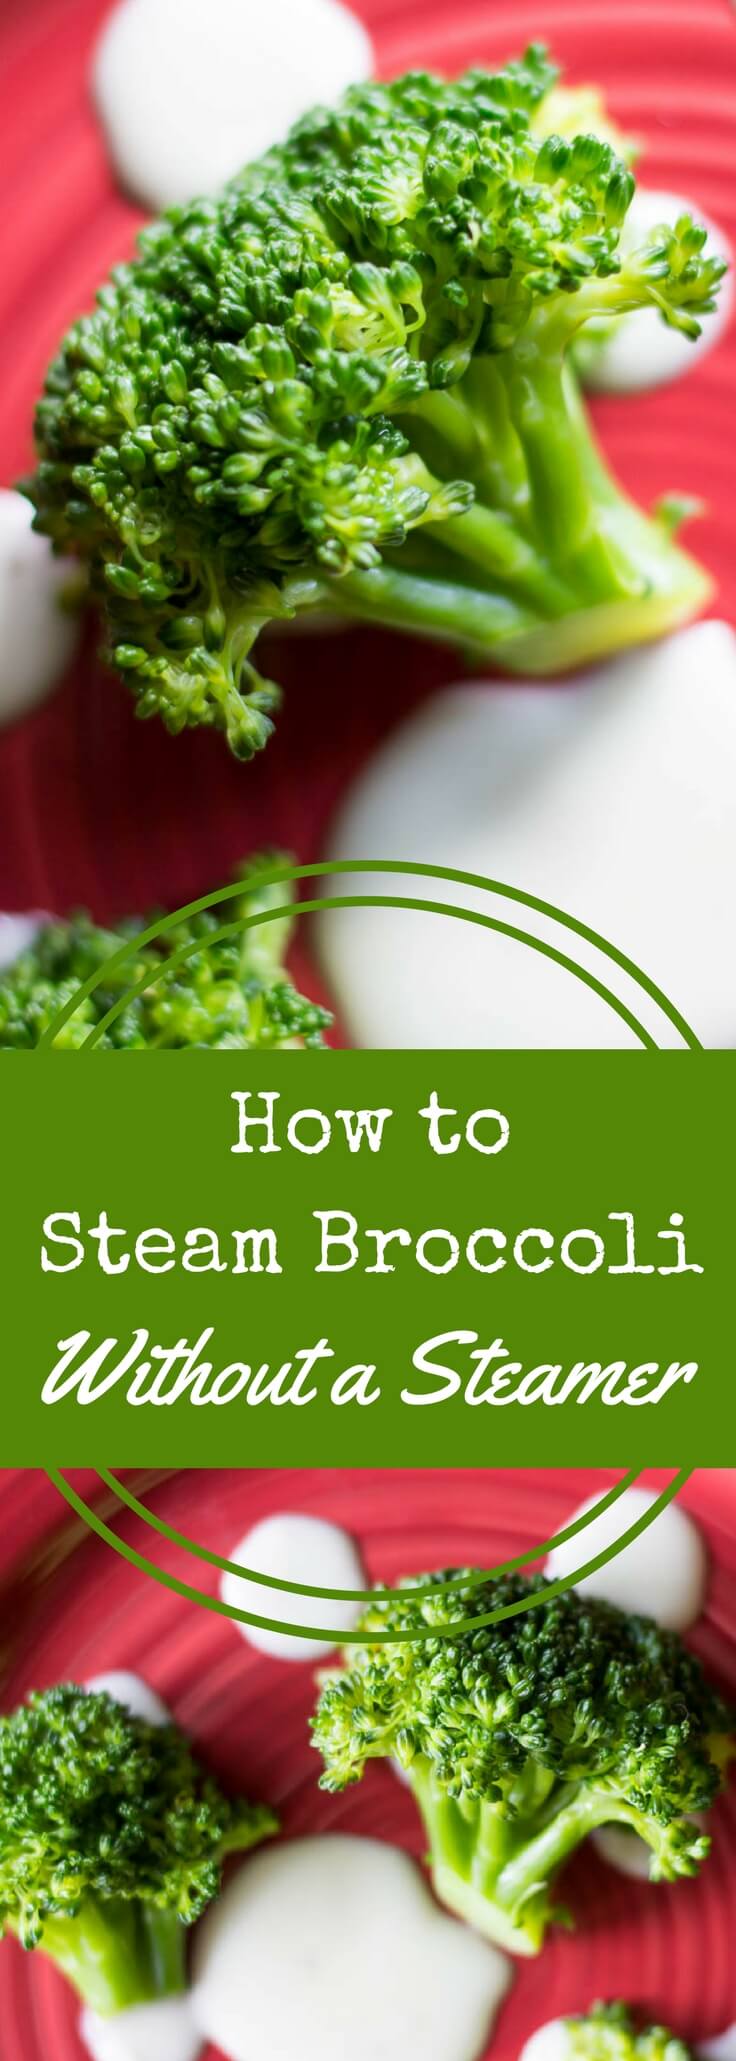 How to Steam Broccoli Without a Steamer Basket